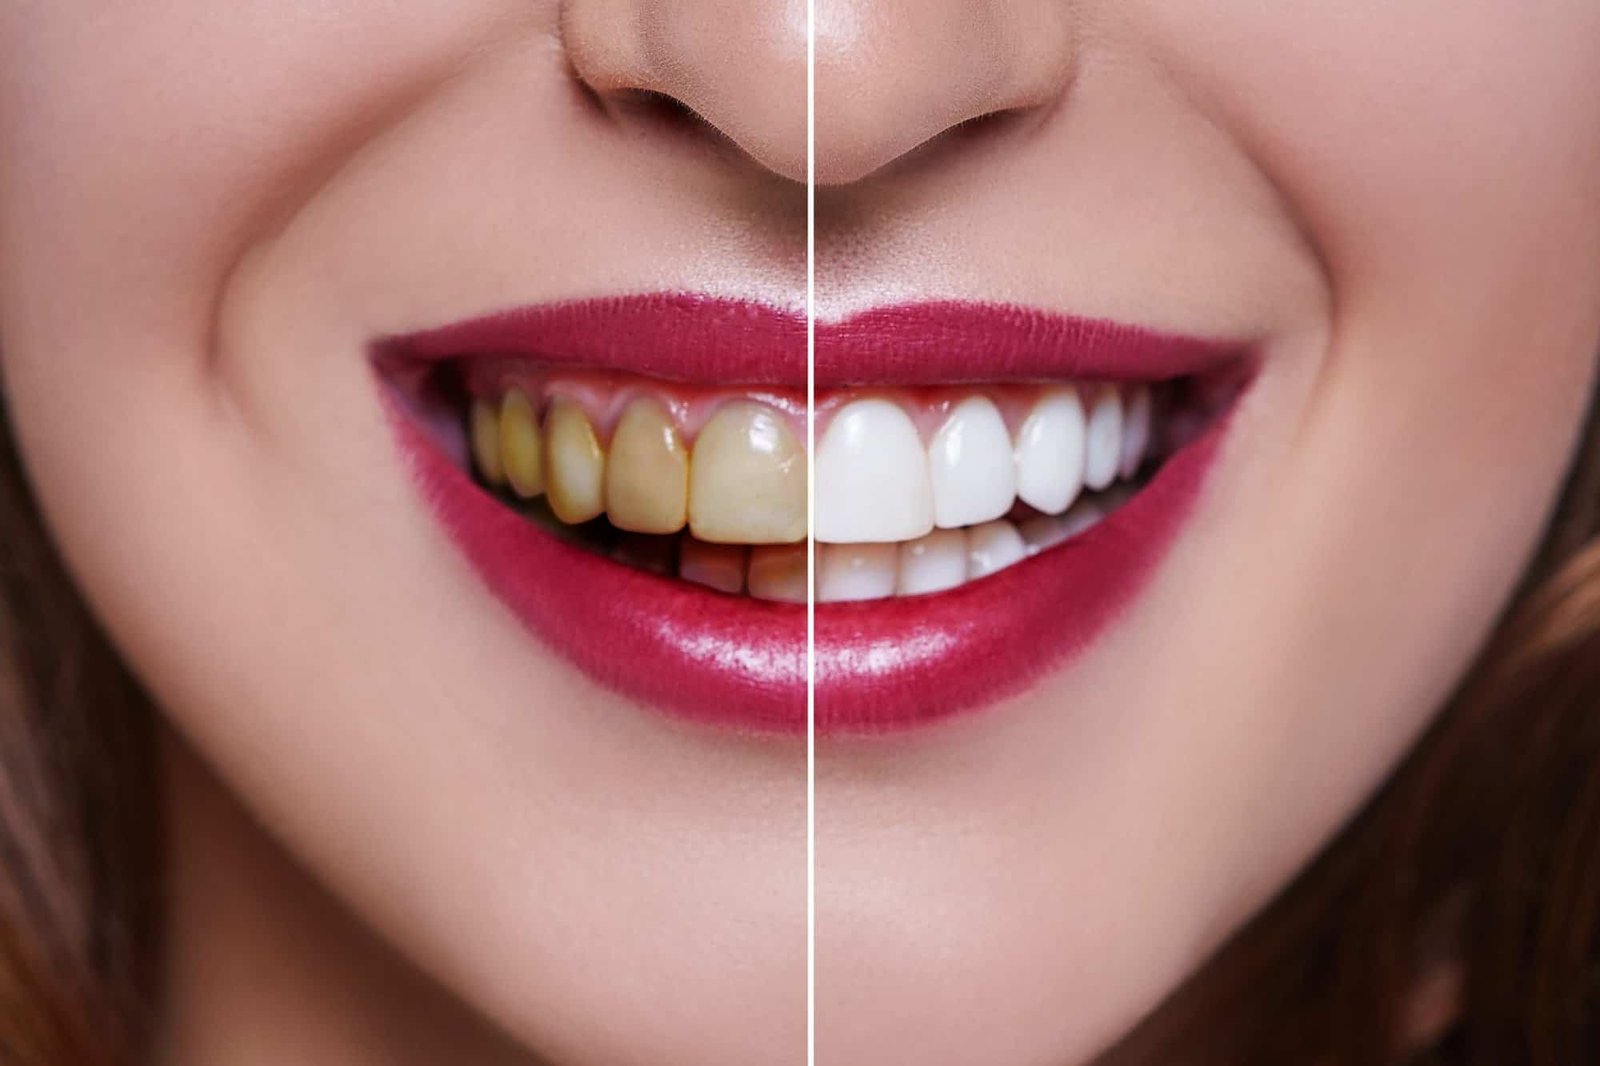 Things to remember while planning to get a teeth whitening treatment